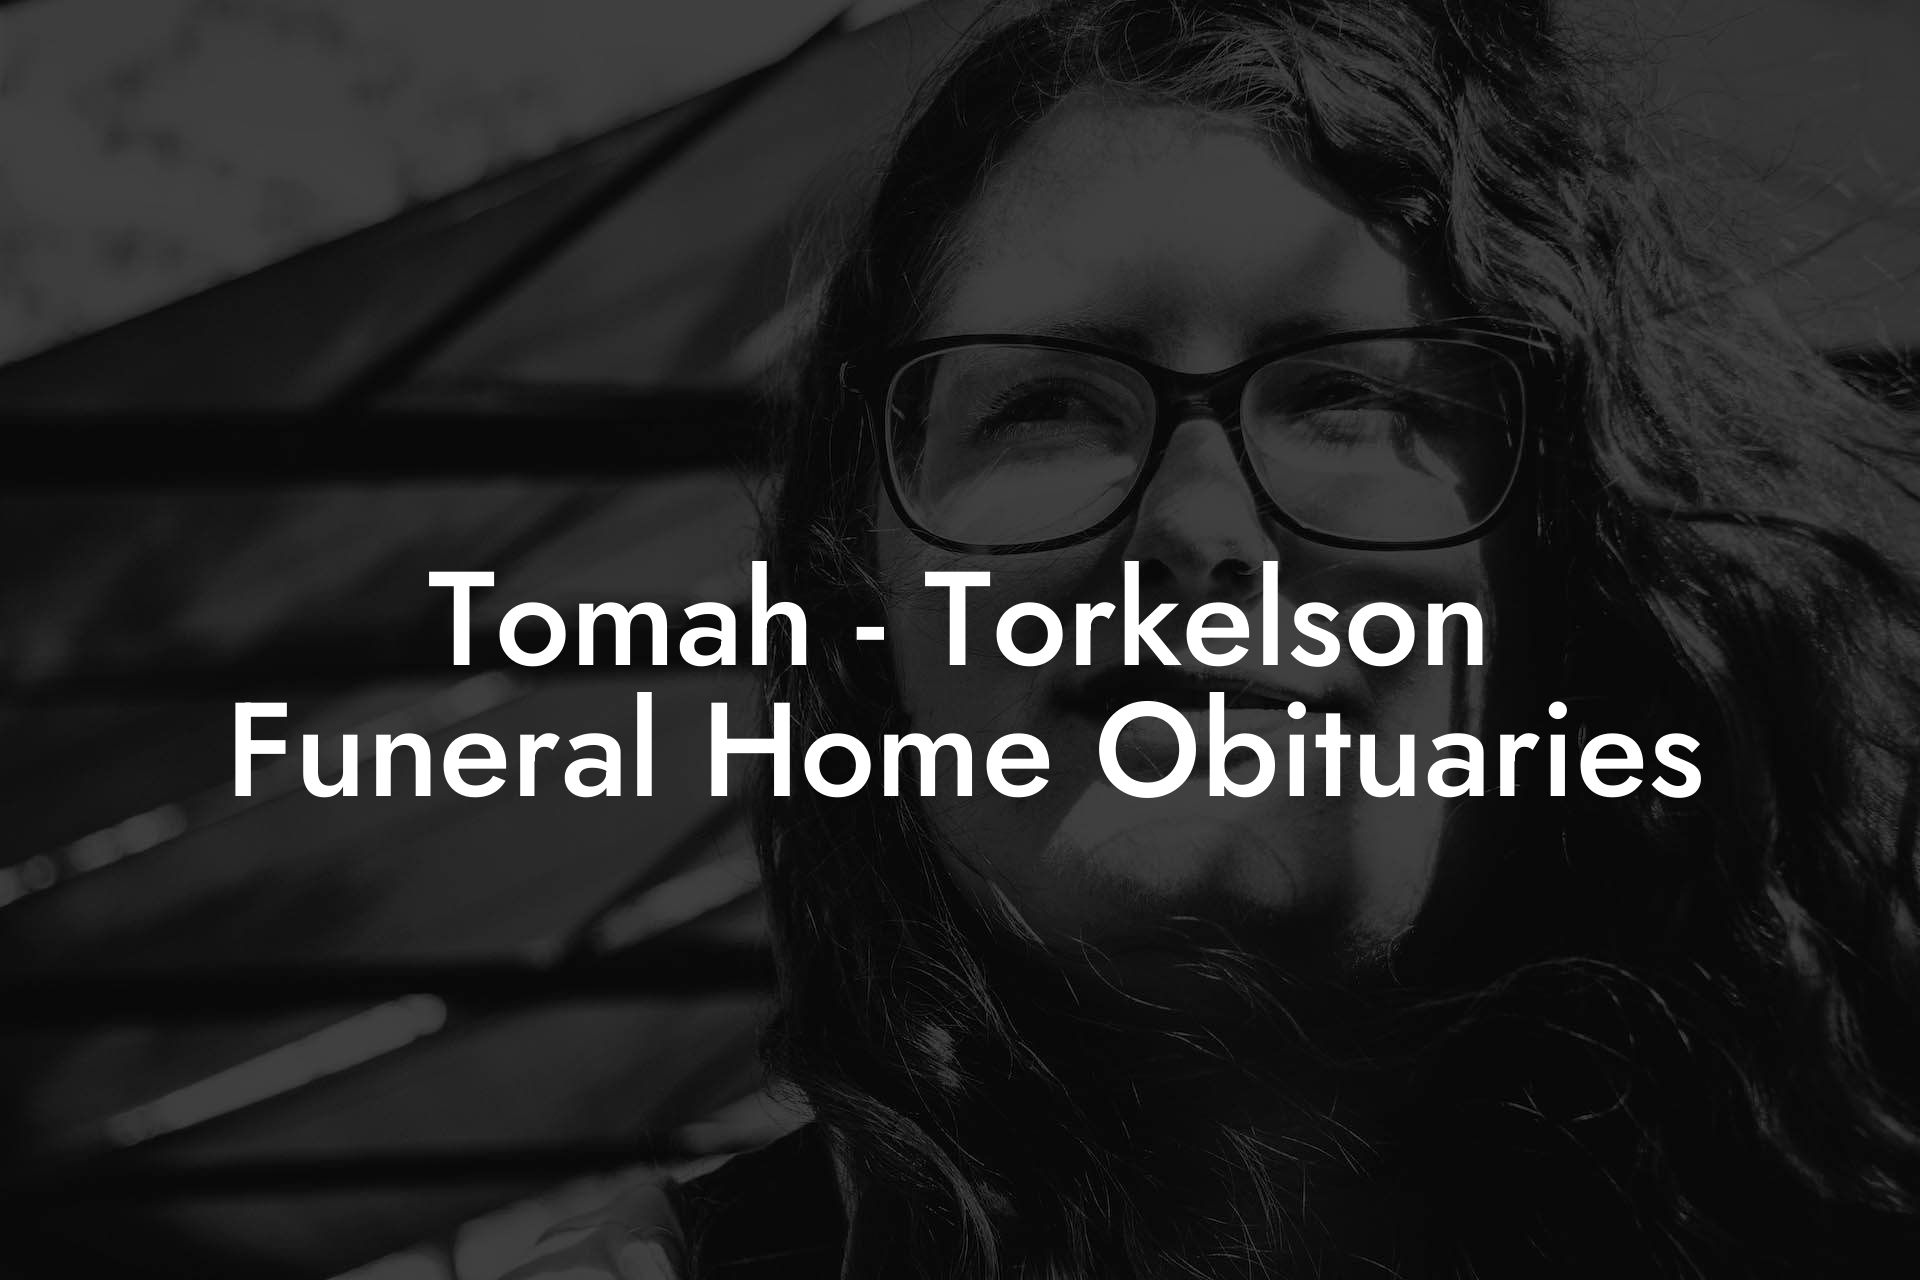 Tomah - Torkelson Funeral Home Obituaries